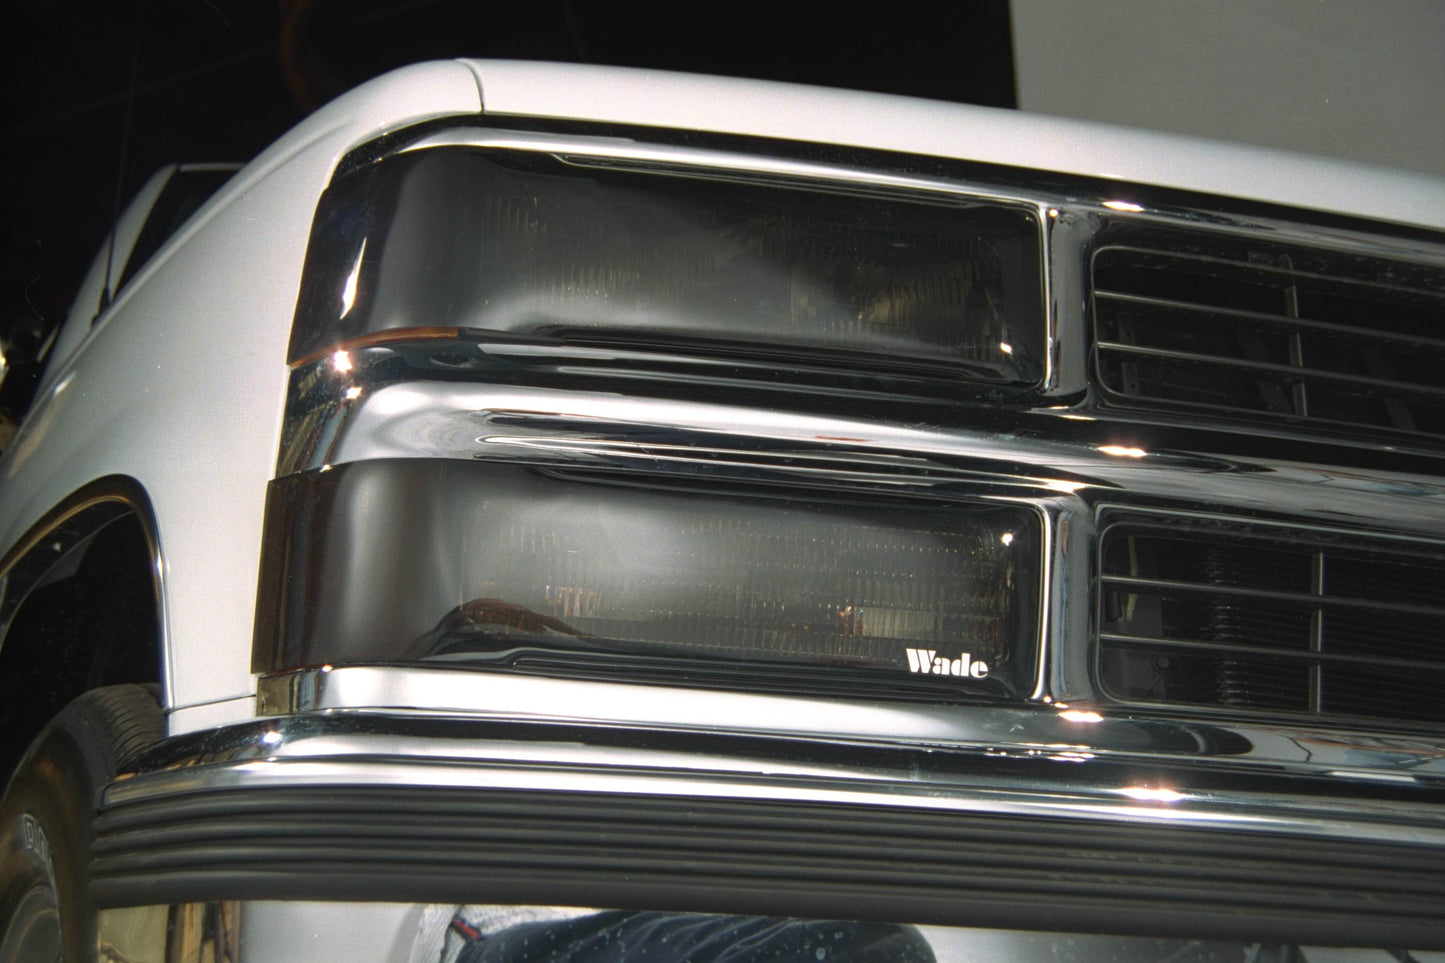 1983 Ford T-Bird Head Light Covers